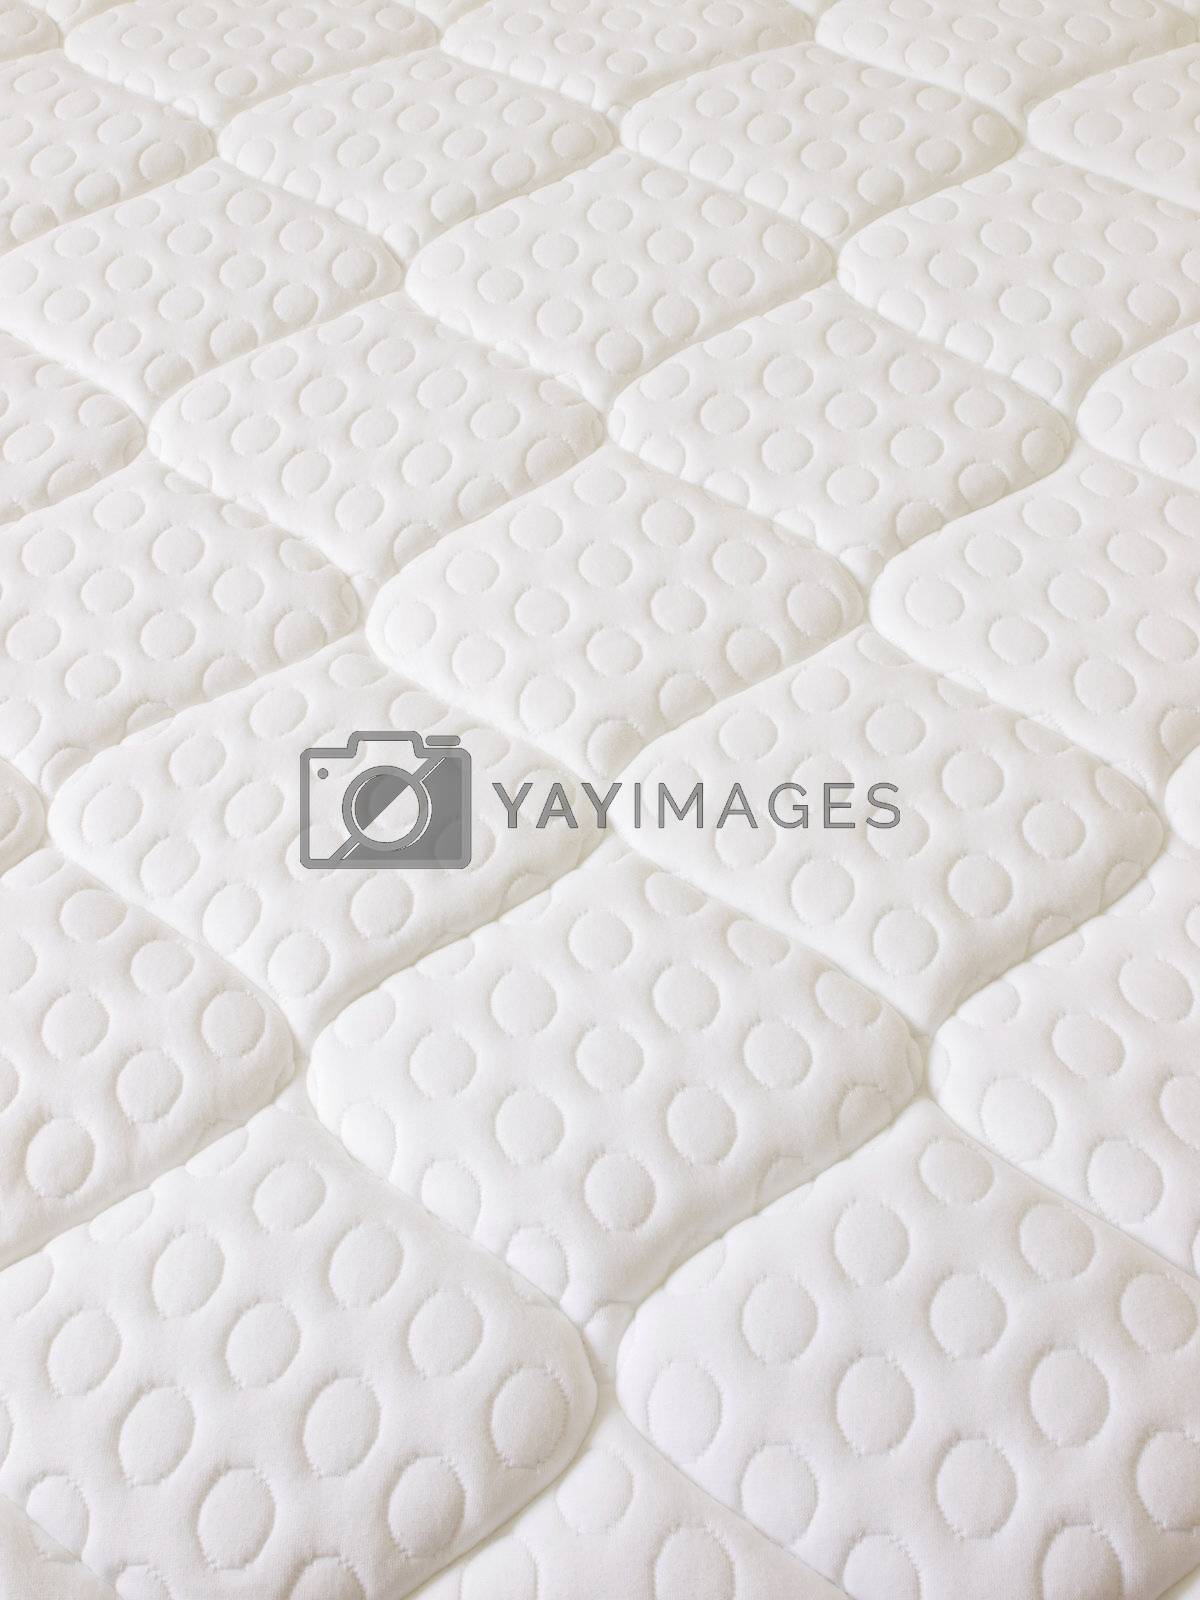 Royalty free image of mattress by zkruger